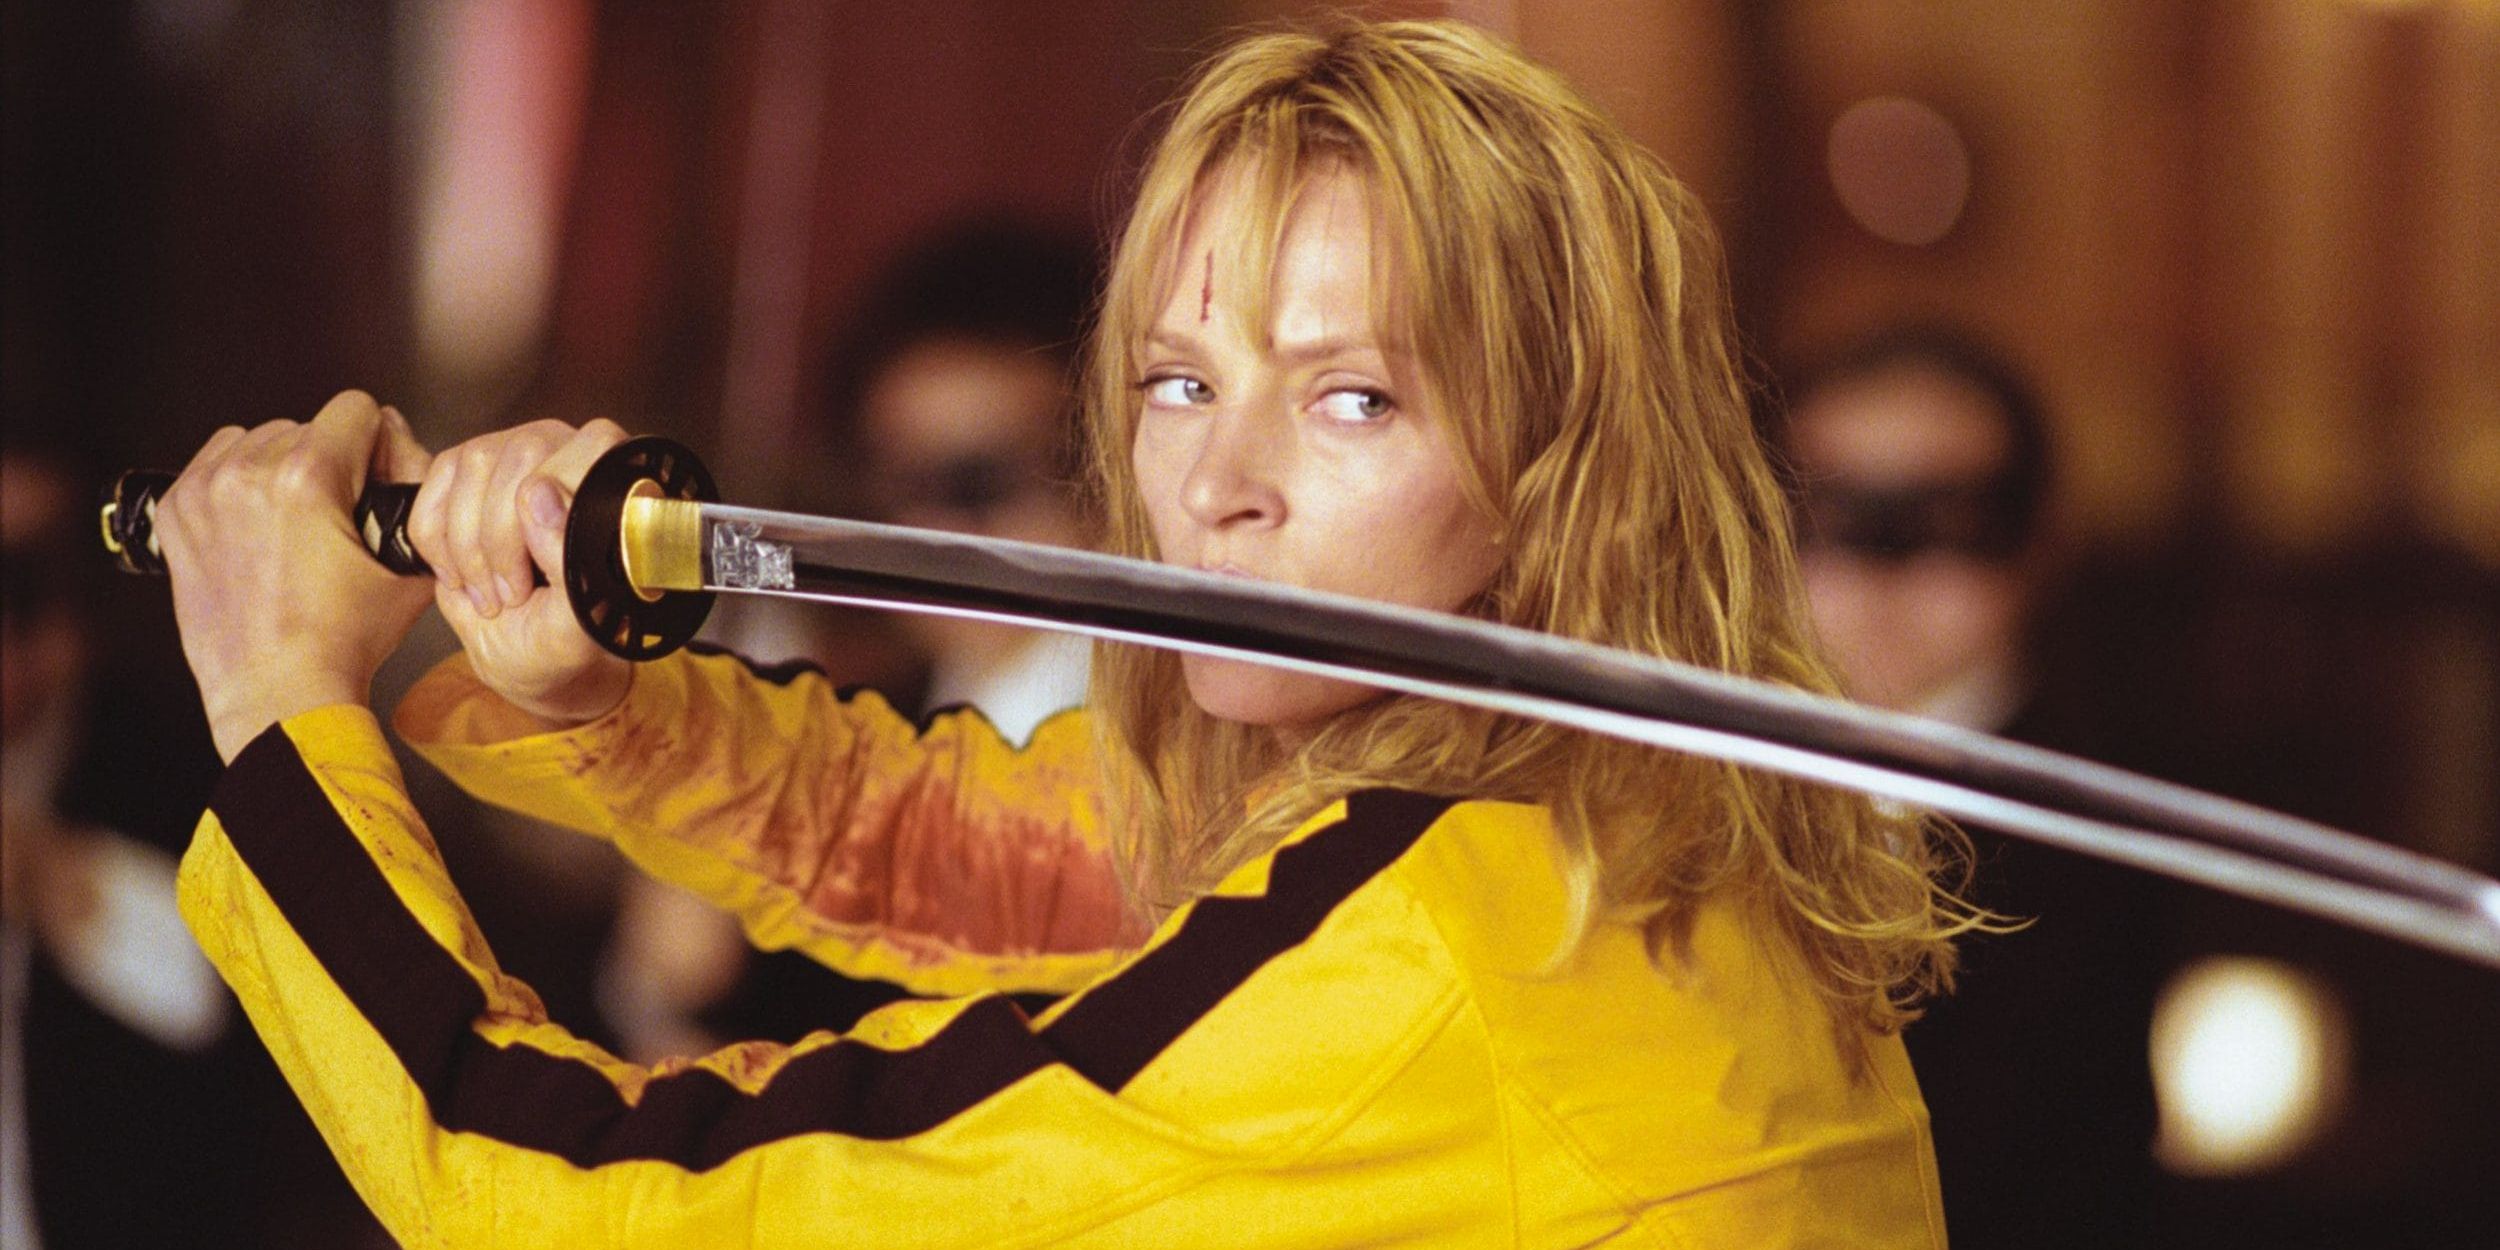 Adorned in a bloodied yellow tracksuit, a vengeful female assassin wields a katana against a horde of assassins.